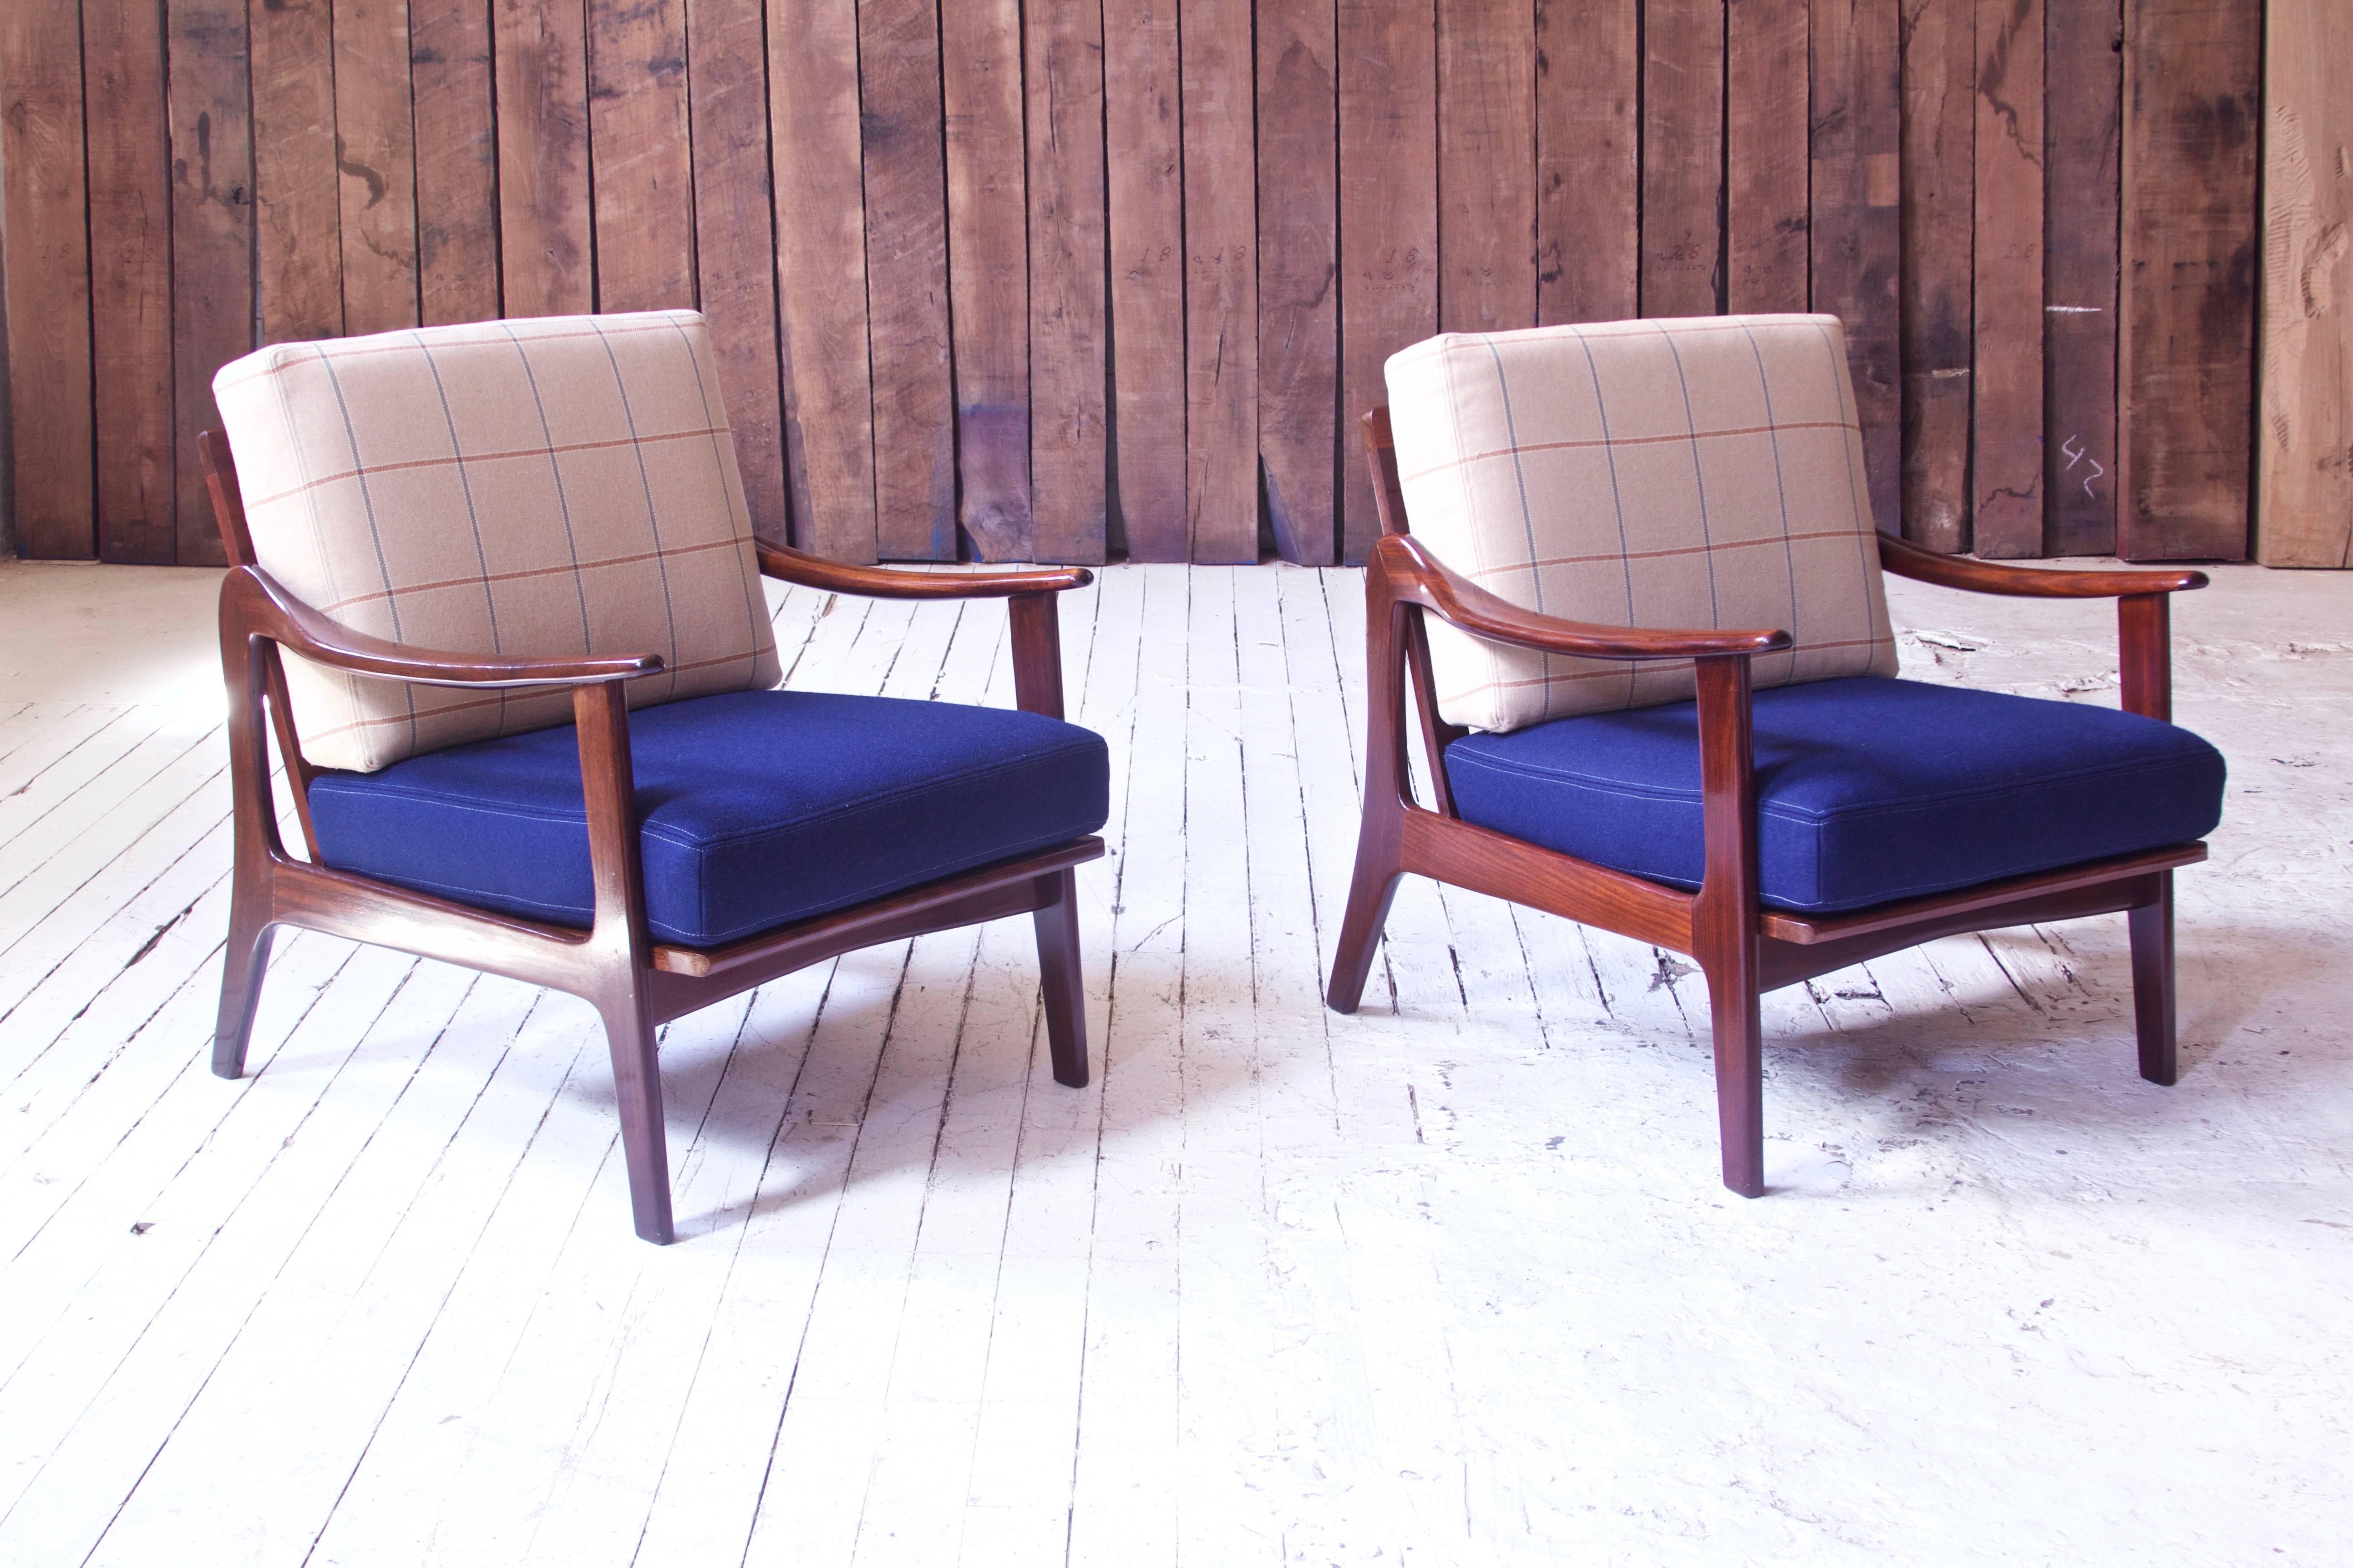 Rare pair of sculpted teak lounge chairs by Norwegian-born furniture designer Fredrik A. Kayser; manufactured by Vatne Mobler in Norway, circa 1955. The chairs' cushions have been redone in royal blue and light plaid wool, frames reconditioned and